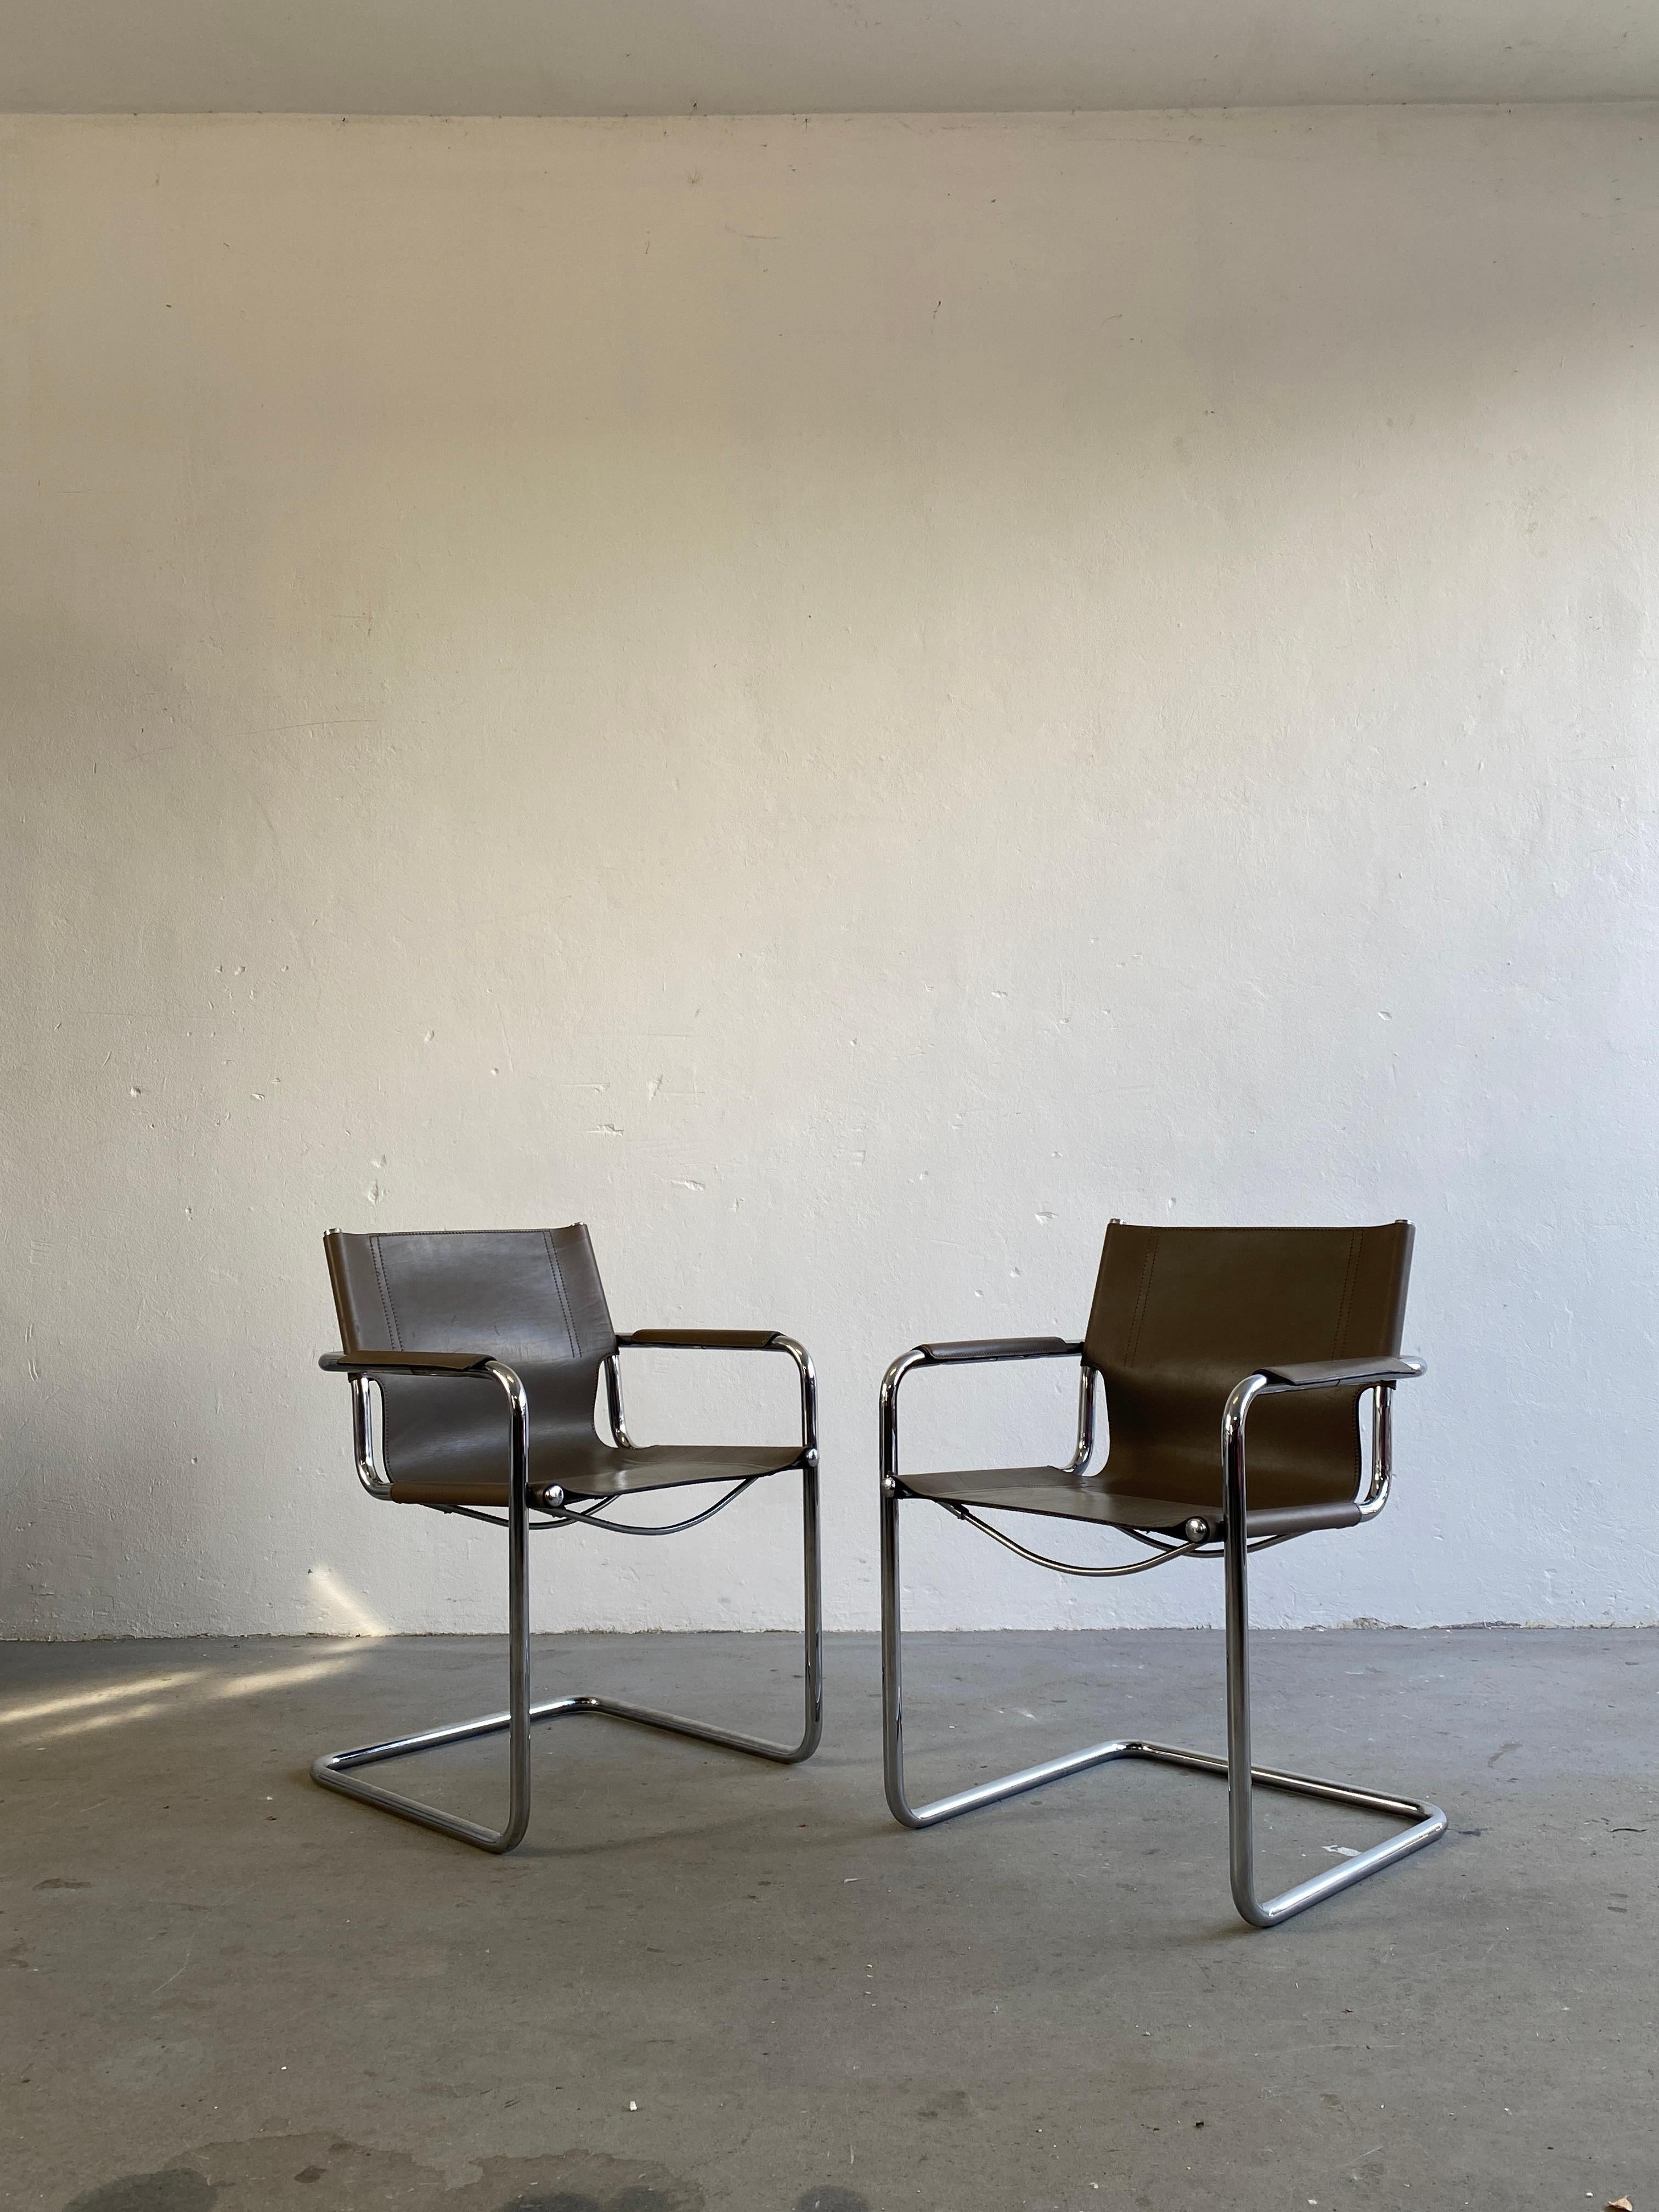 Bauhaus Vintage Leather Cantilever Chairs, Centro Studi for Matteo Grassi, 1980s Italy